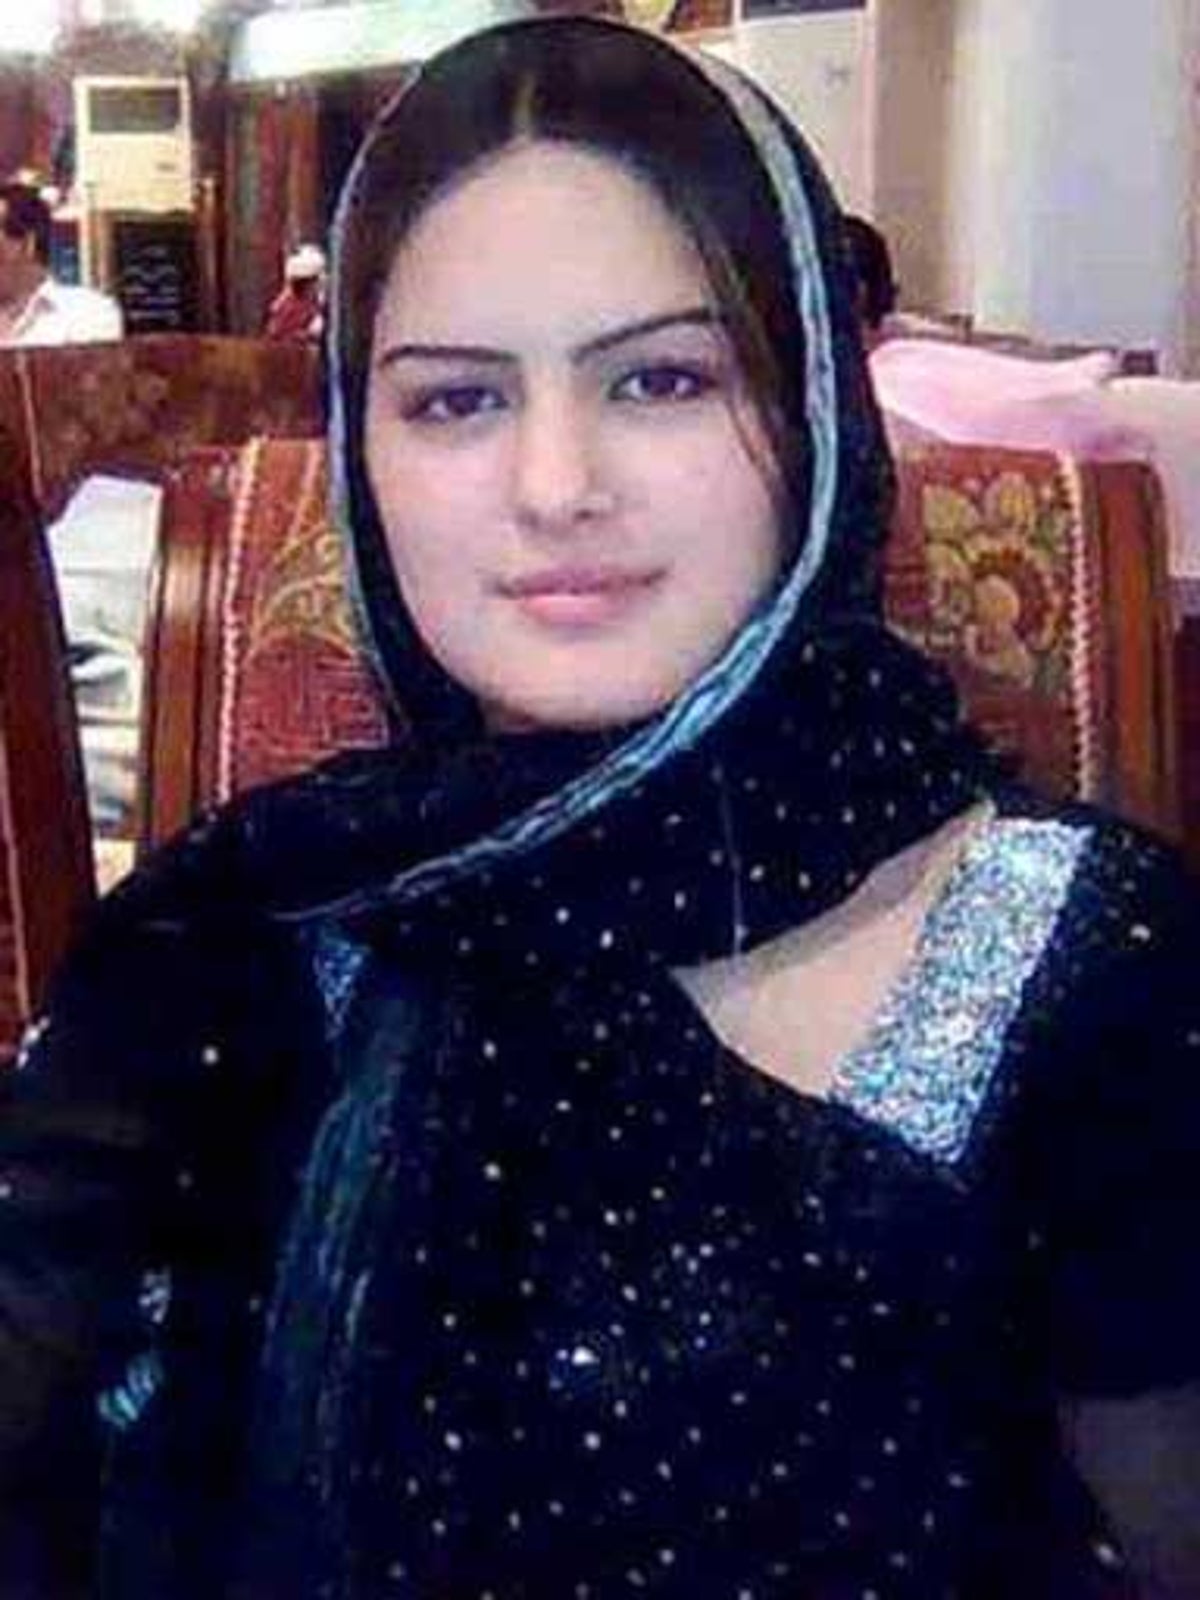 Ghazala Javed Xnxx - Ghazala Javed: Singer who defied Taliban's decree is shot dead in  north-western Pakistan | The Independent | The Independent